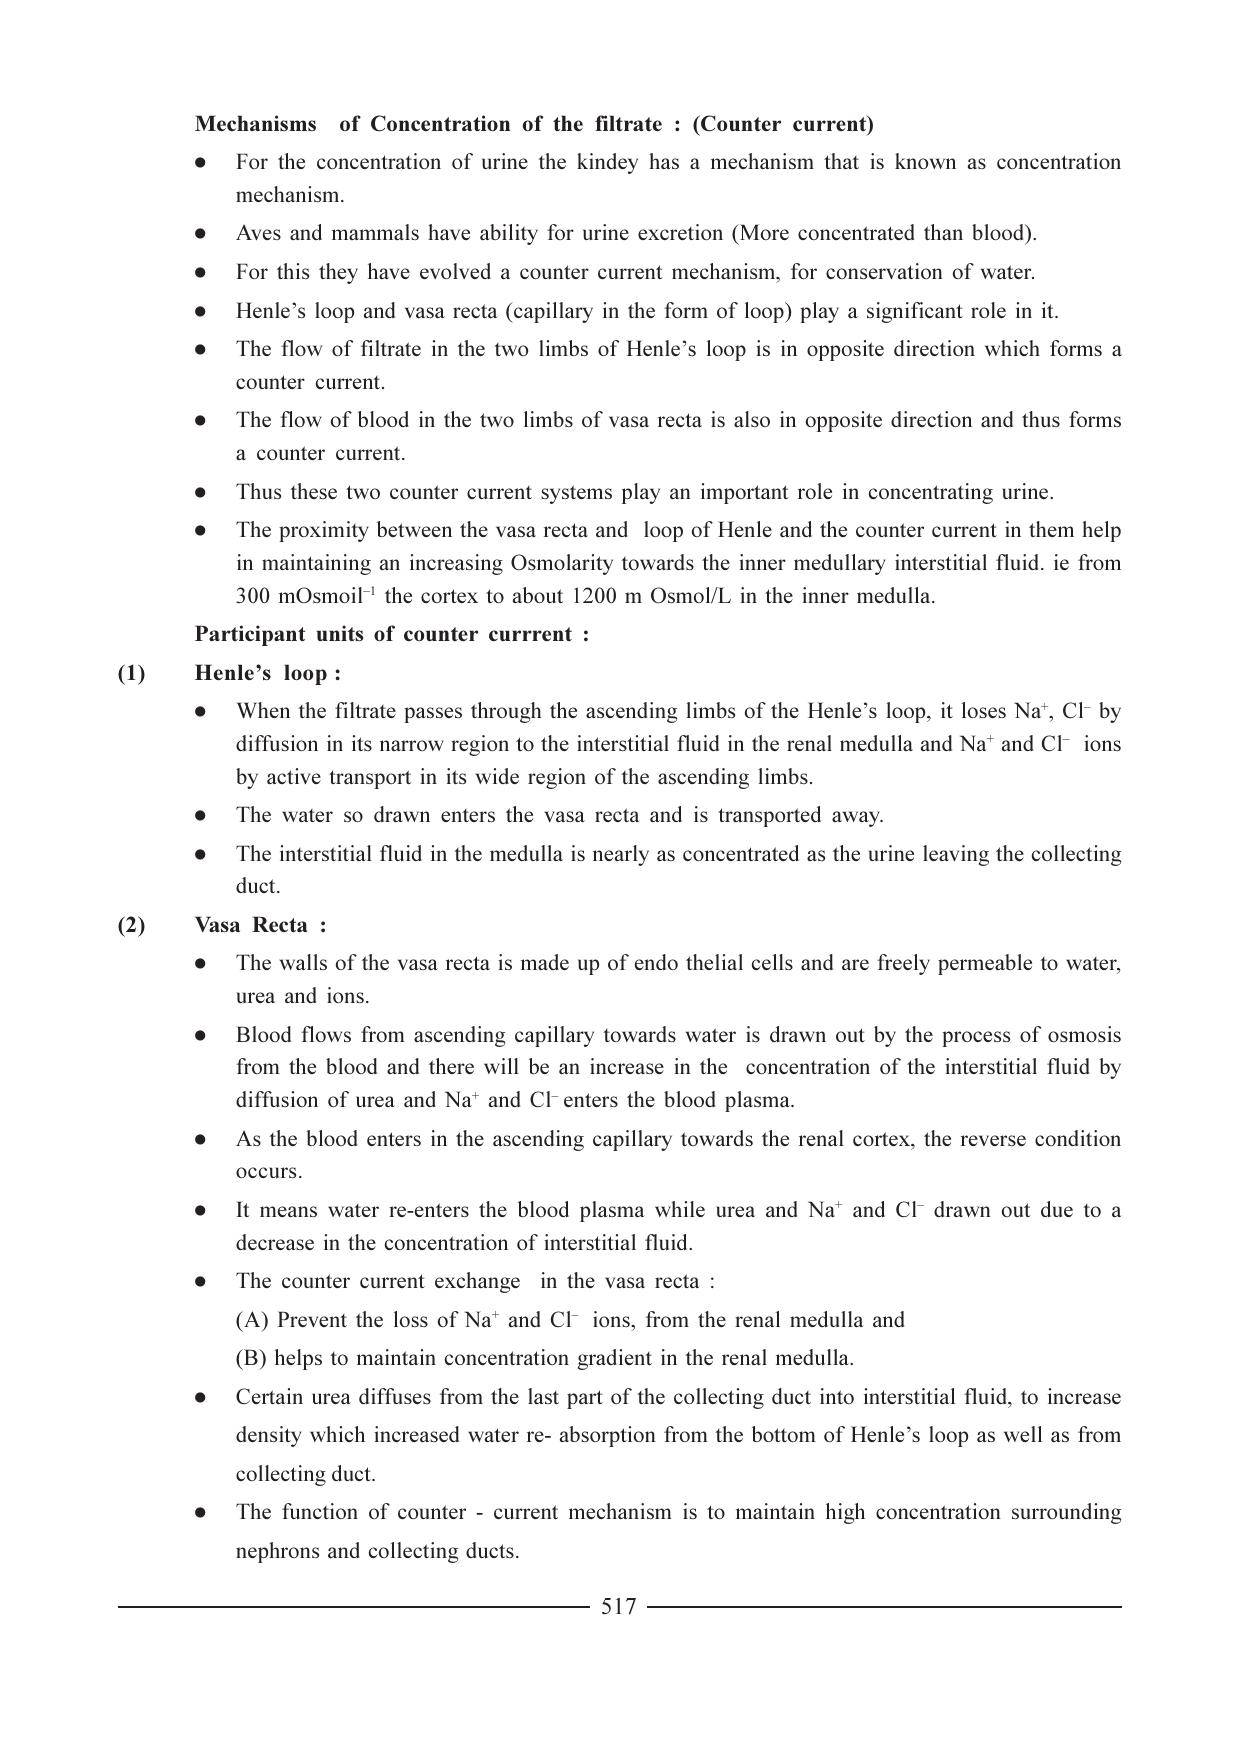 GSEB HSC Biology Question Paper (English Medium)- Chapter 25 - Page 9